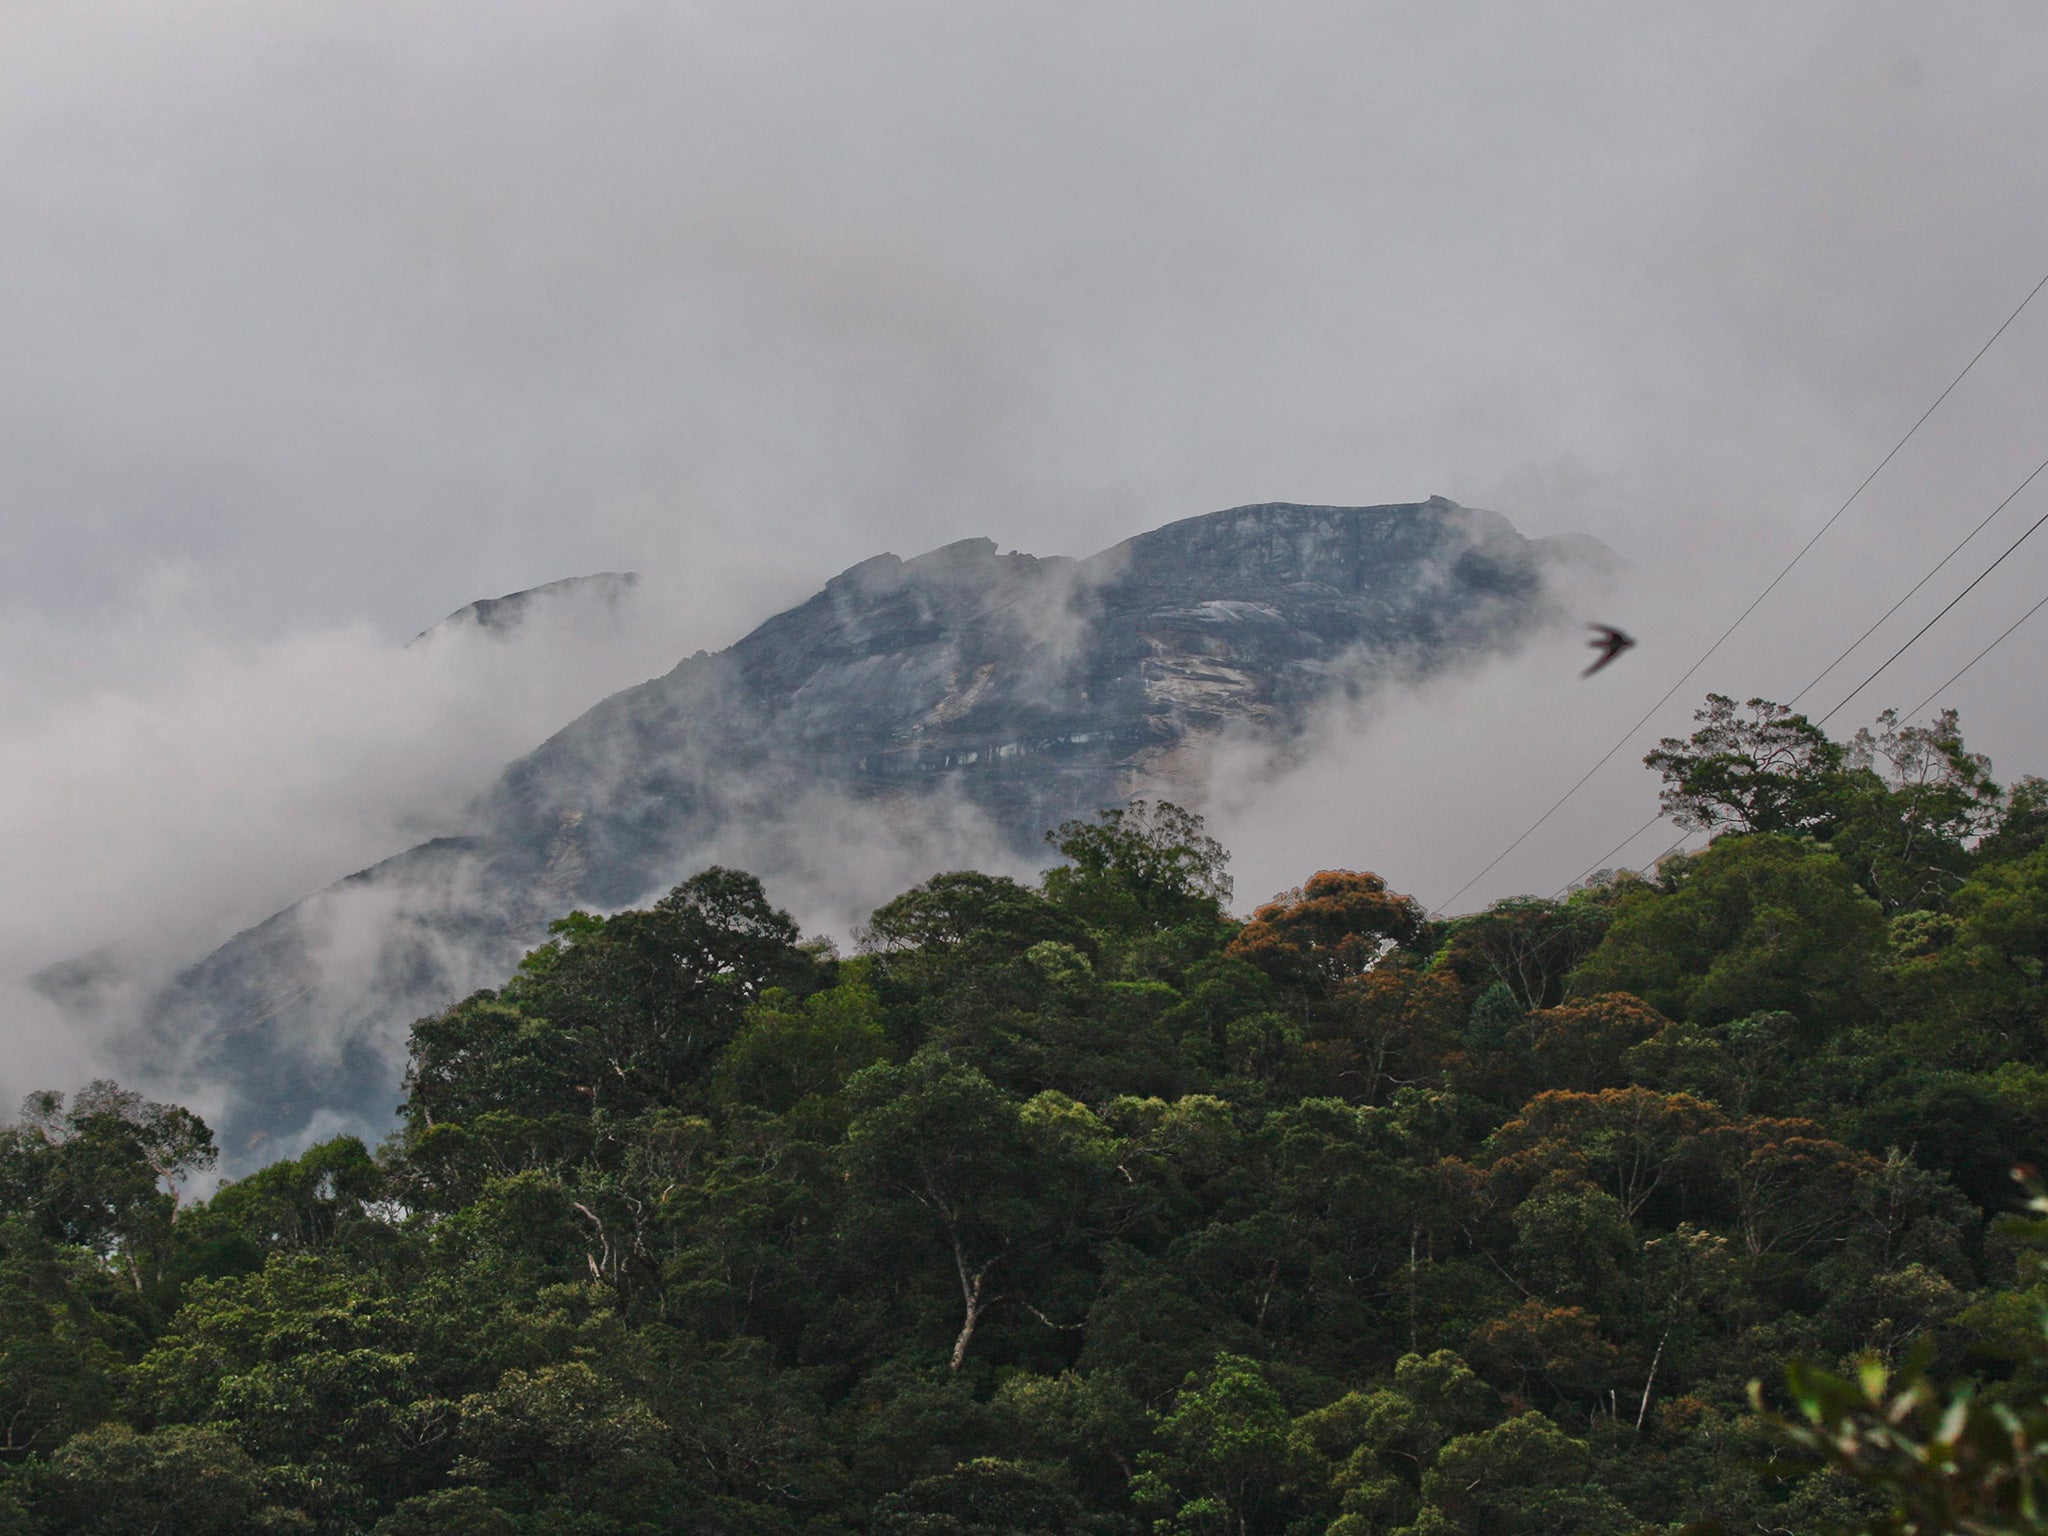 Mount Kinabalu during a rescue mission after an earthquake near the peak claimed at least 11 lives